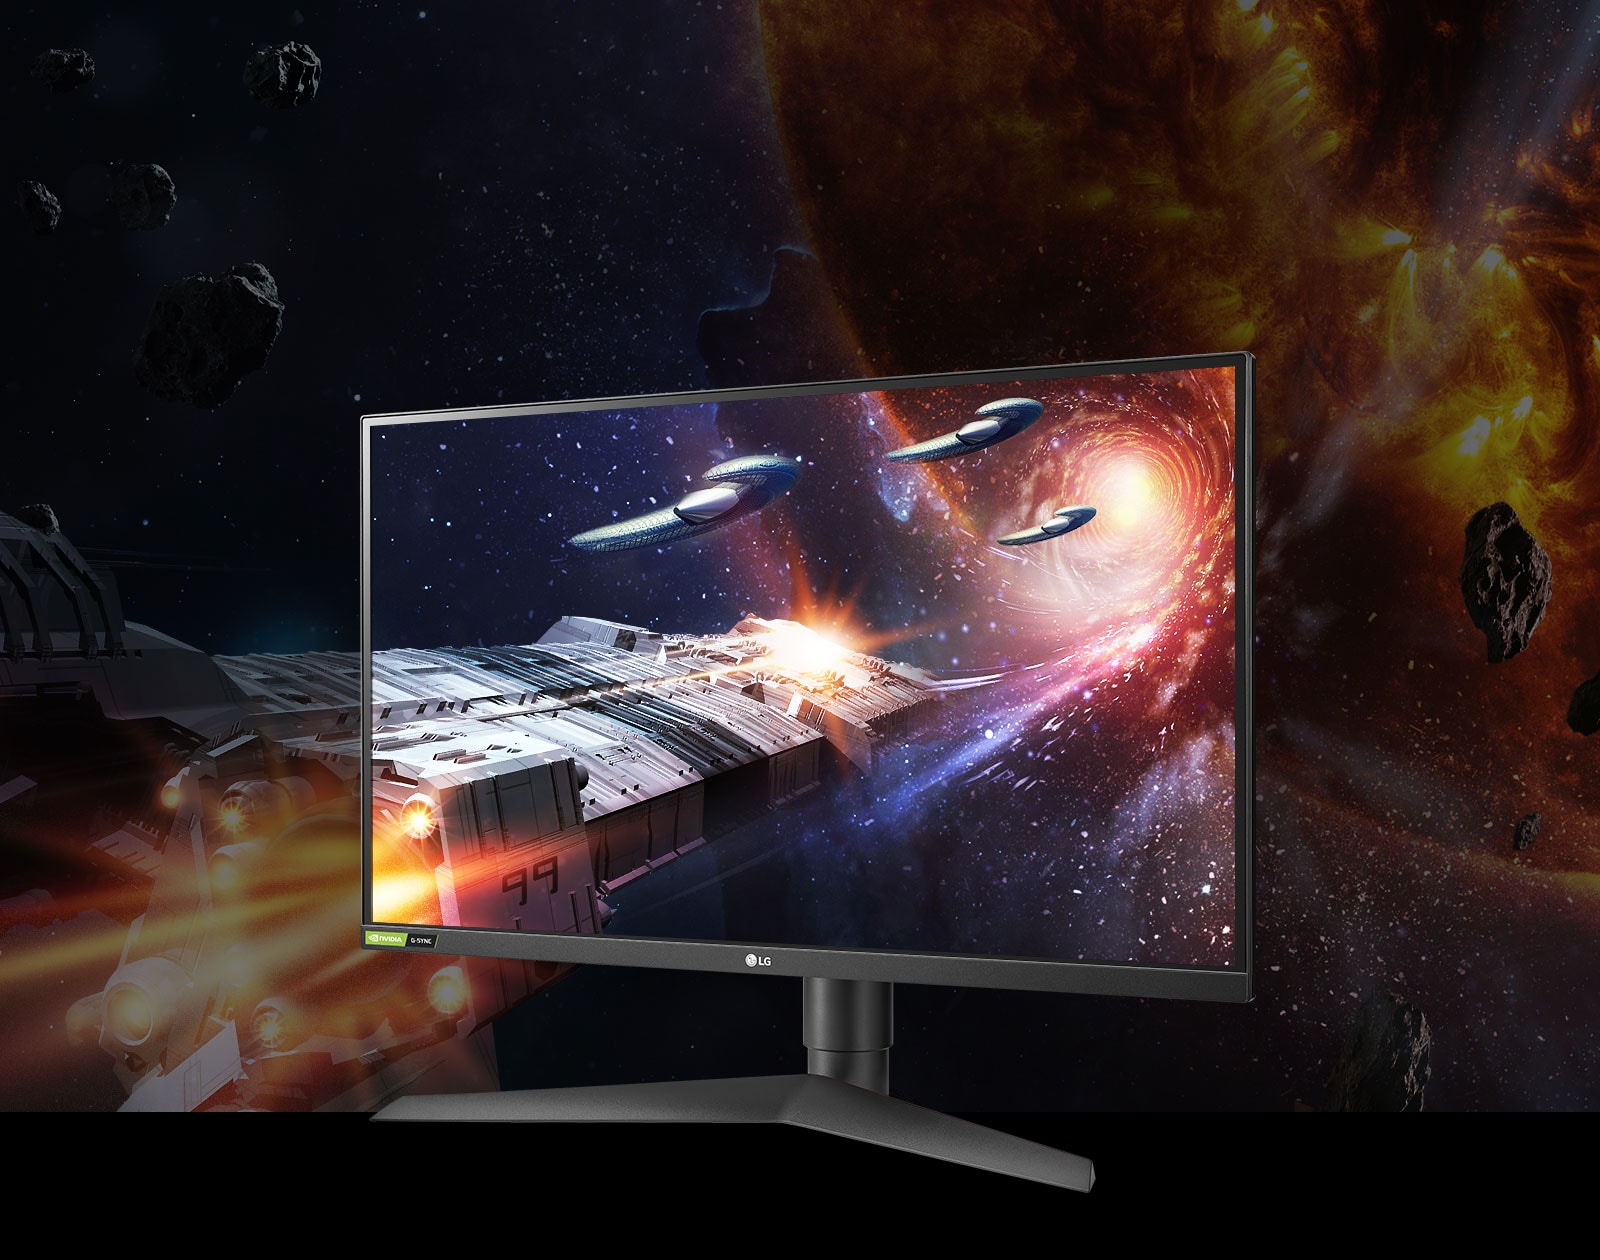 Image of 27GN750 monitor with gaming graphic on-screen demonstrating rich colors and contrast